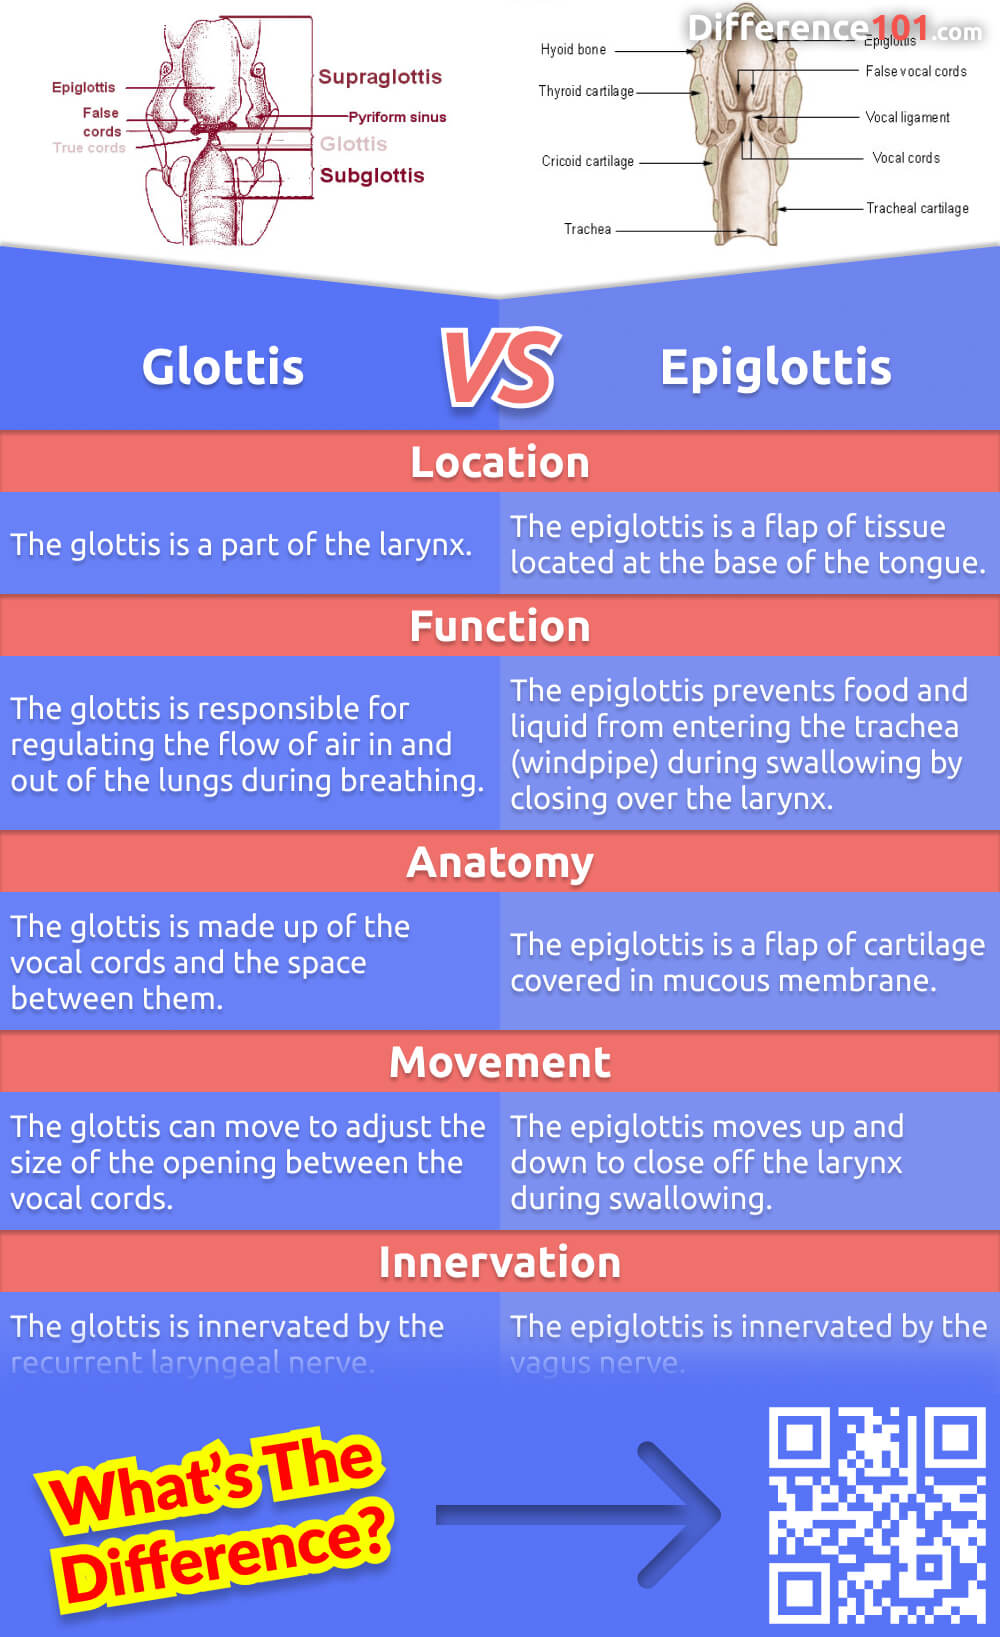 If you've ever wondered about the difference between the glottis and epiglottis, you're not alone. In this blog, we dive into their functions, pros, and cons in our respiratory and digestive systems. Understanding these crucial structures can help us maintain optimal health.